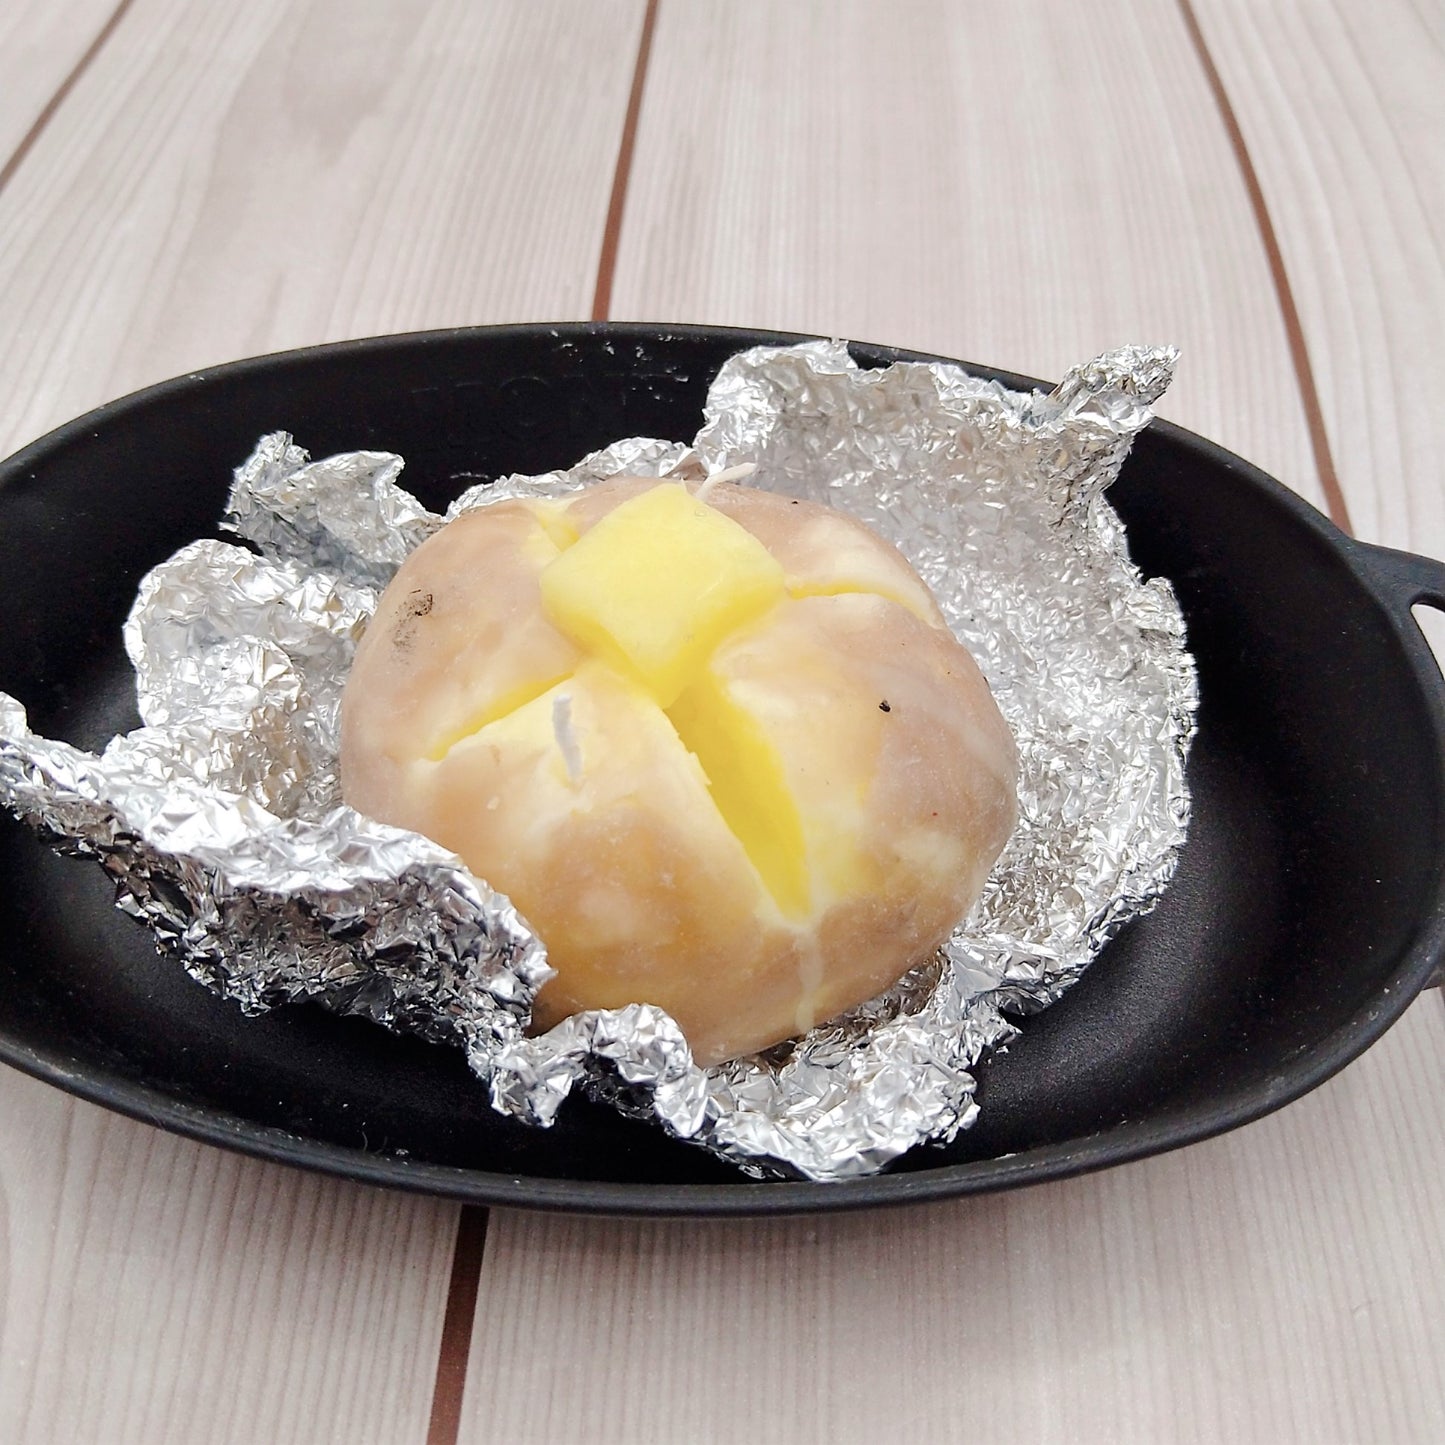 Simply steamed Hokkaido Baron_potatoes with butter candle